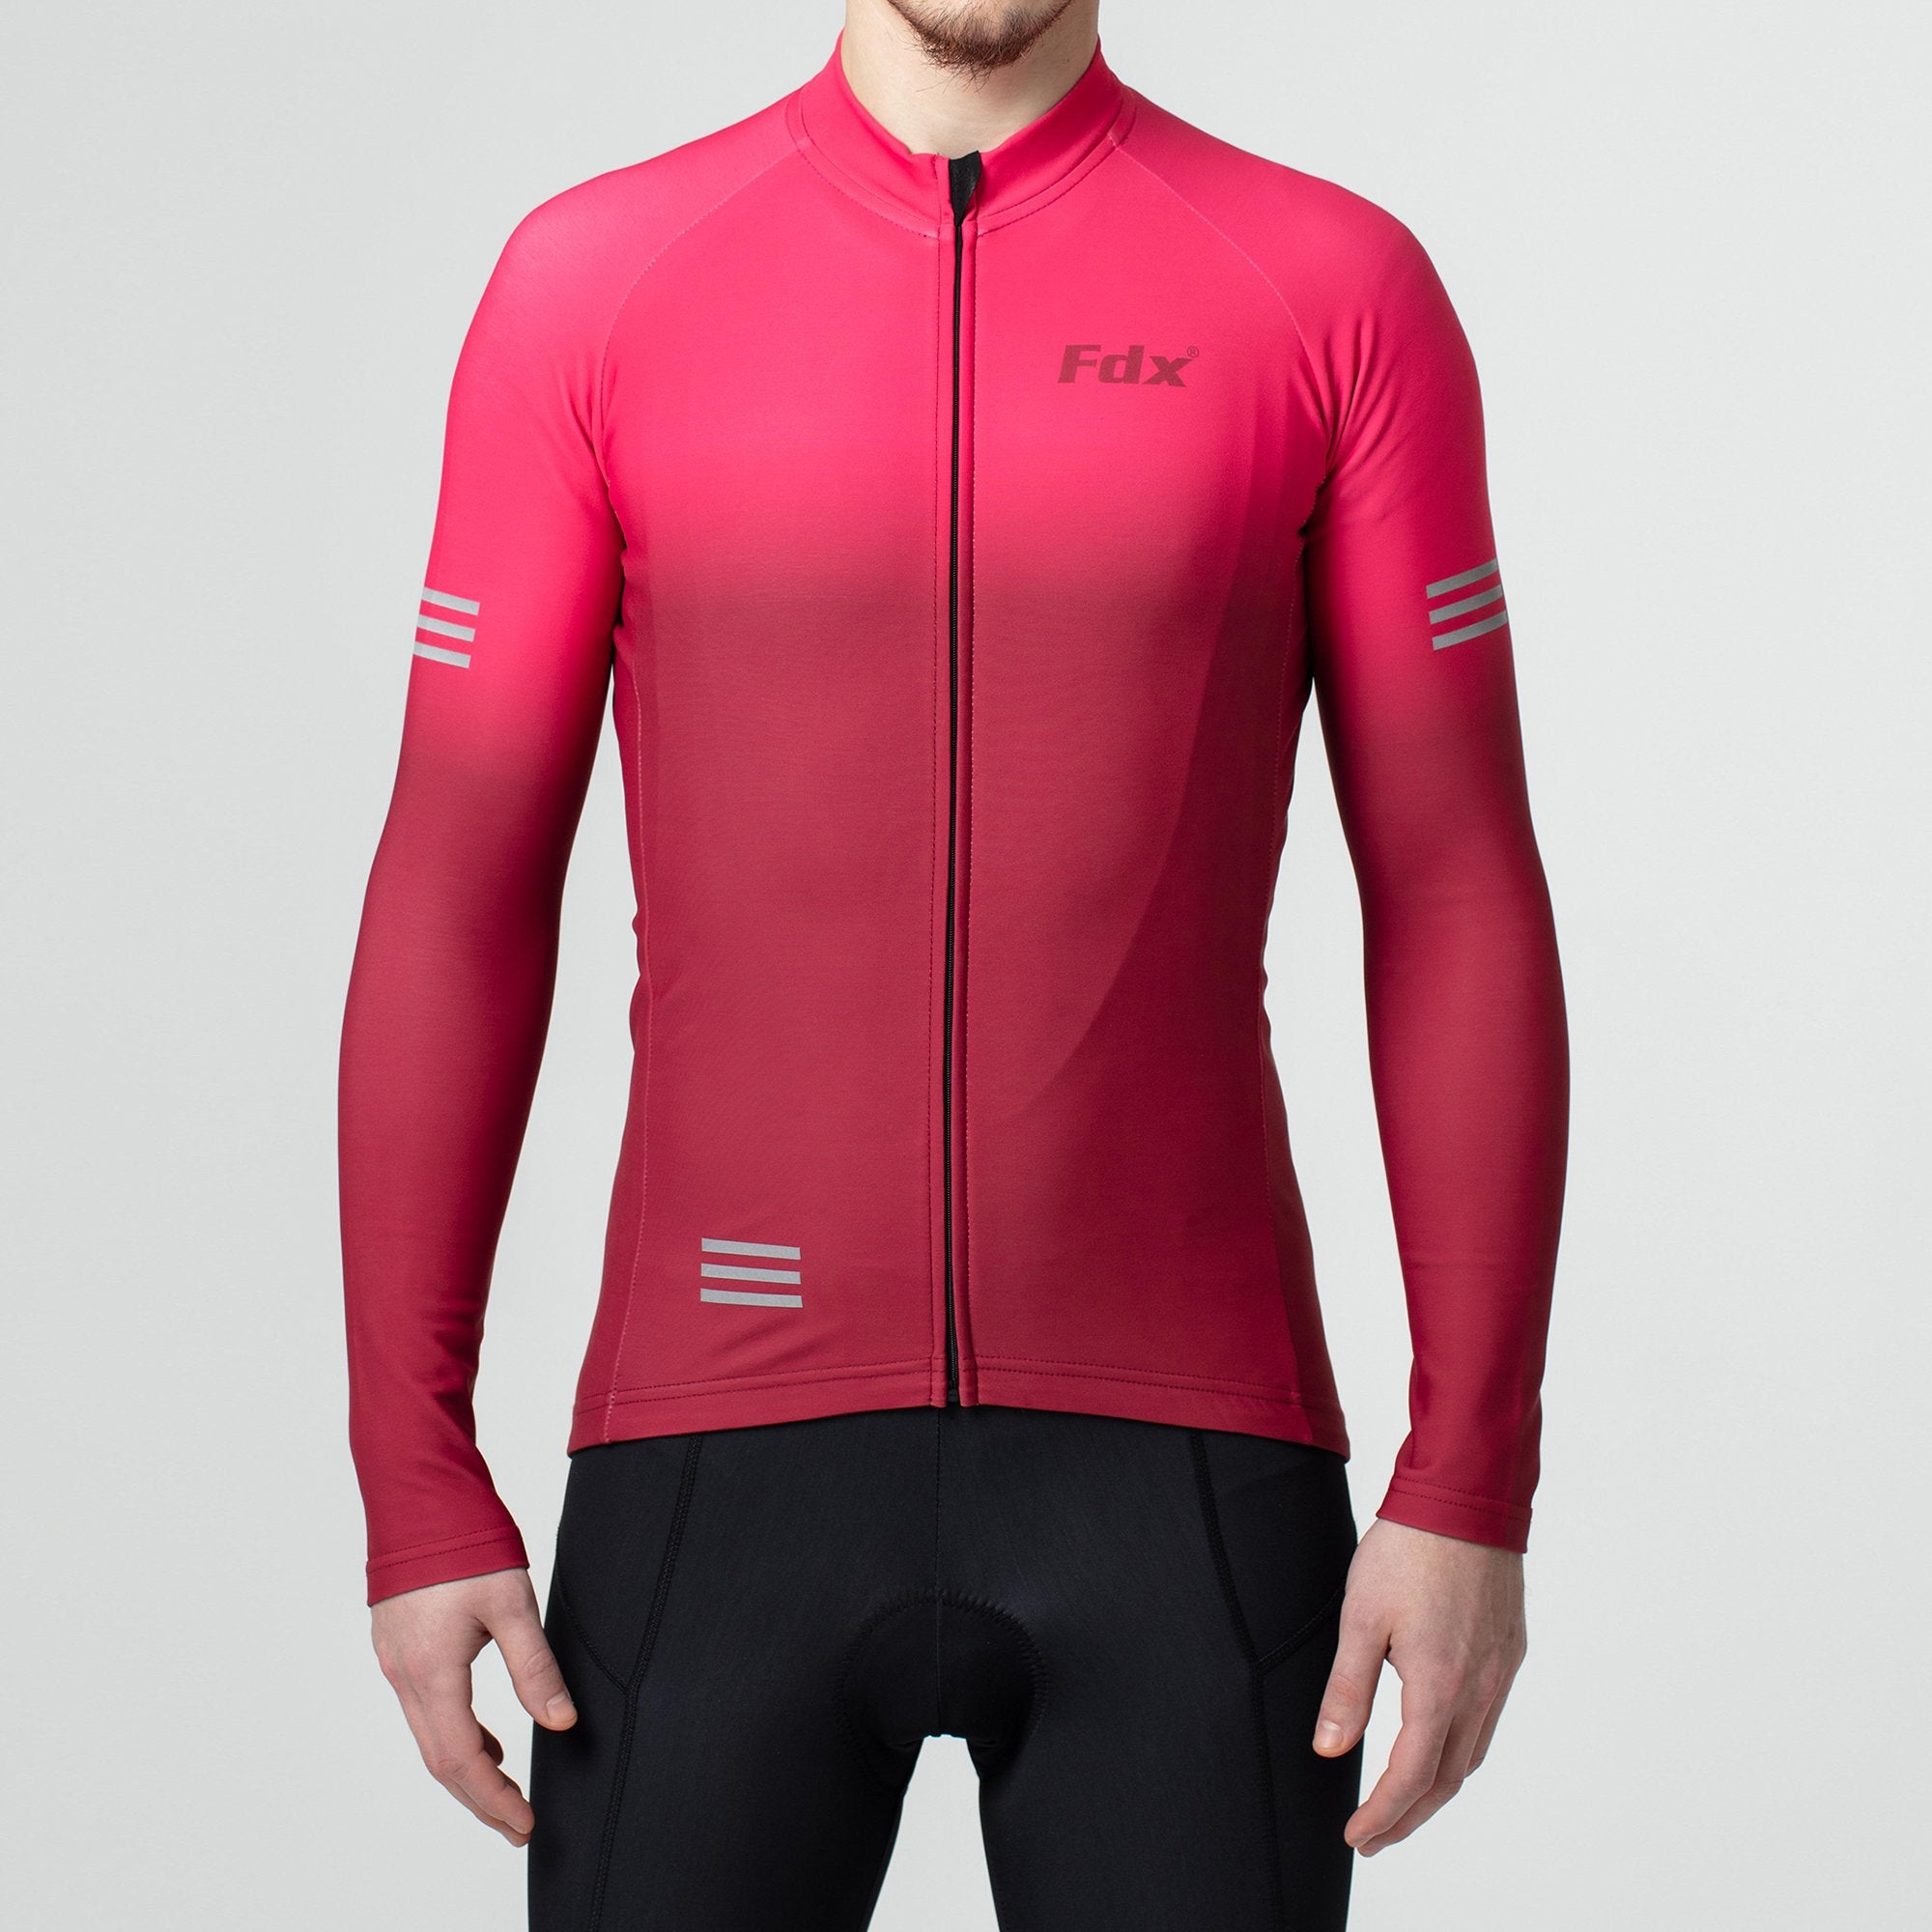 Mens Cycling Jersey Long Sleeves Thermal Outdoor Winter Bicycle Fleece Shirt Black/White Small